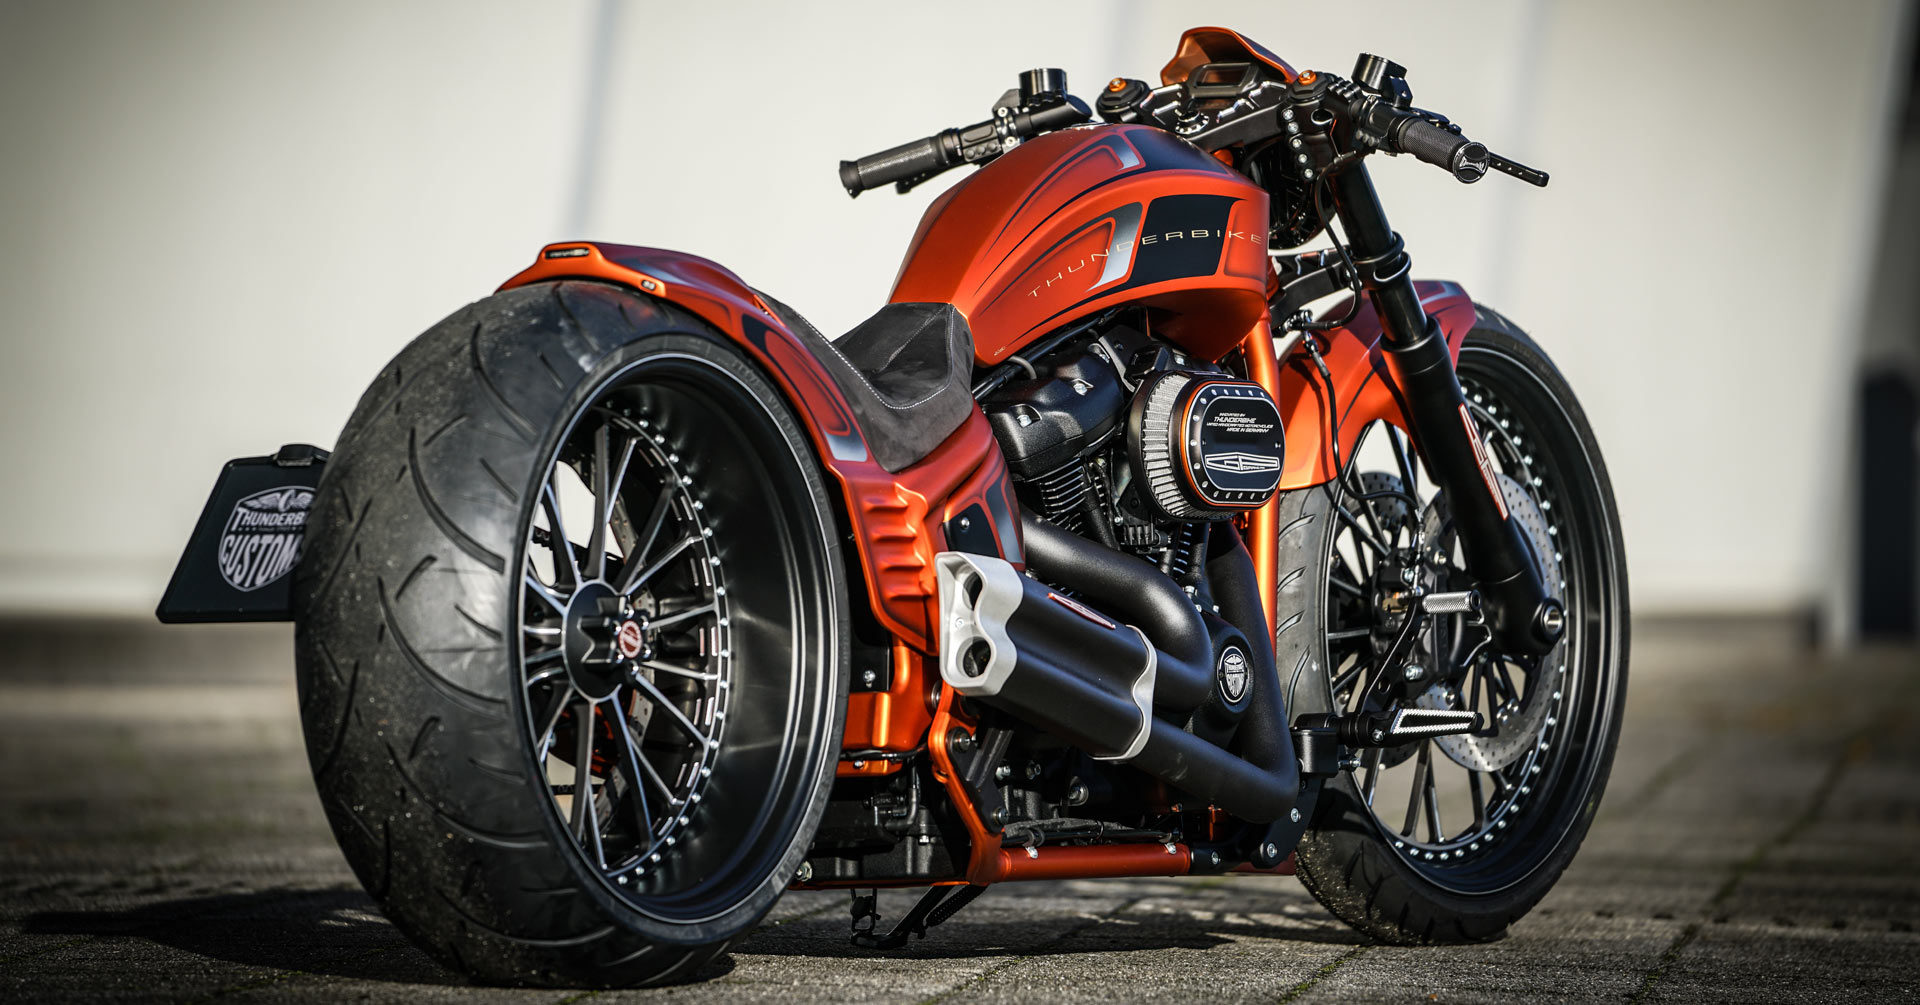 Customized Harley Davidson Softail Breakout Motorcycles By Thunderbike